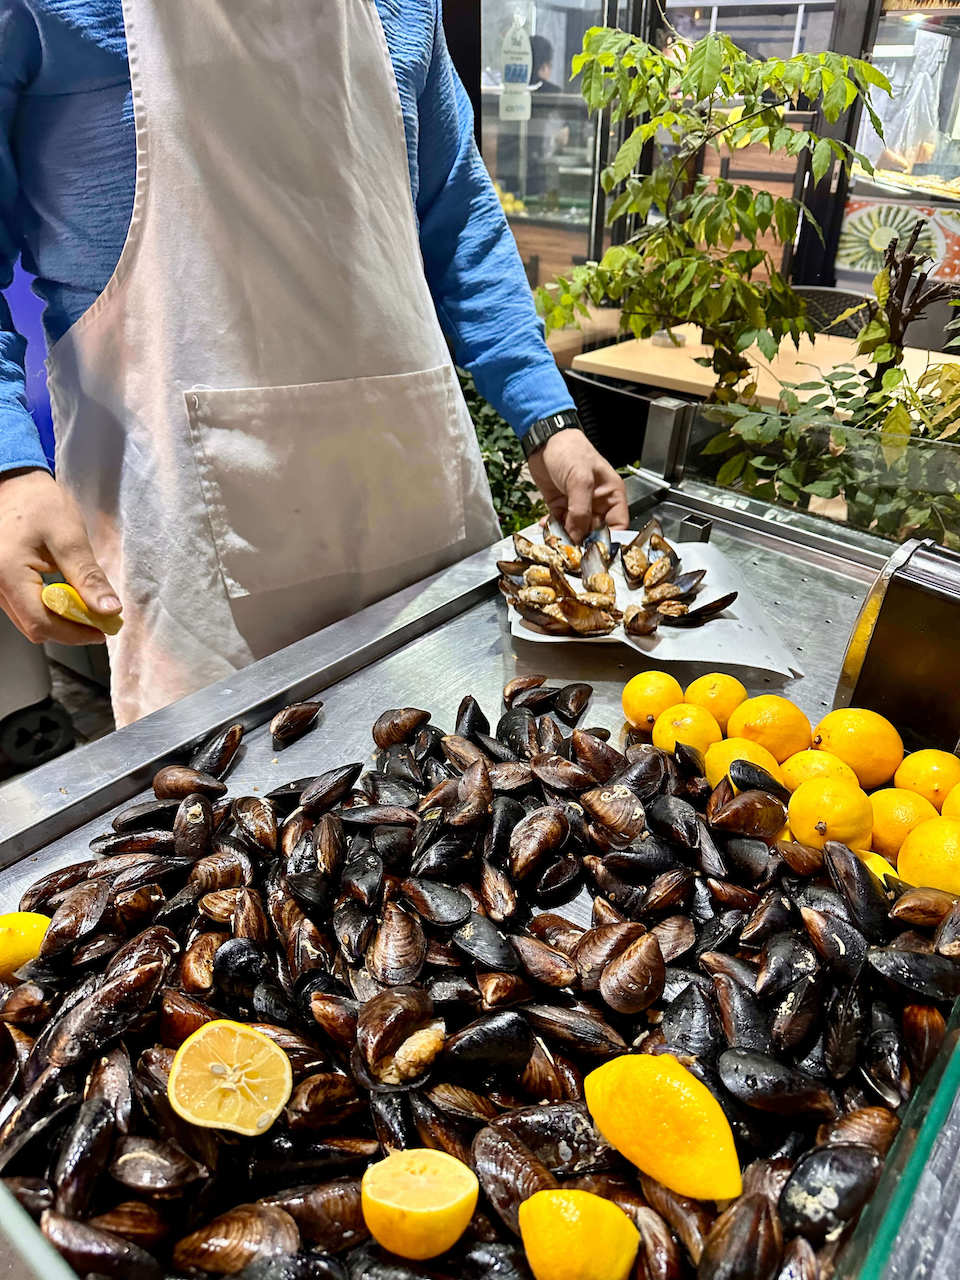 Turkey, Istanbul - Midye Dolma, mussels stuffed with herbed rice